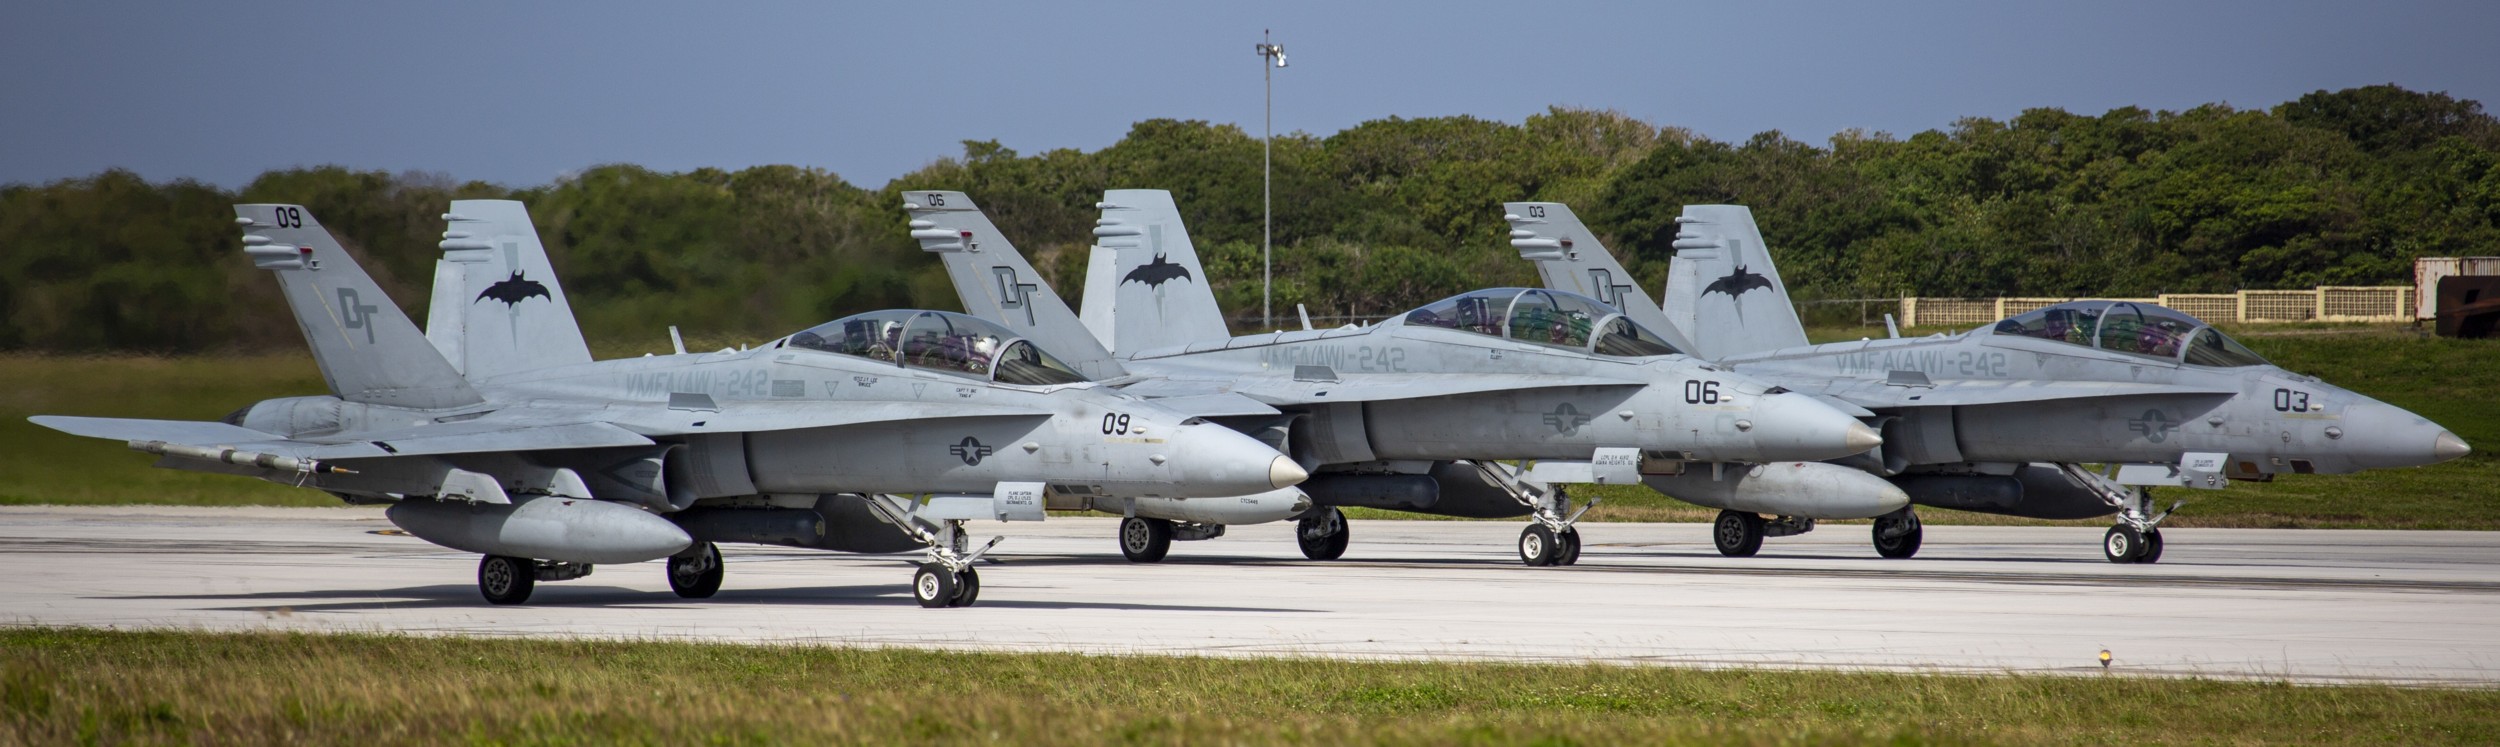 vmfa(aw)-242 bats marine all-weather fighter attack squadron usmc f/a-18d hornet 90 exercise cope north 2020